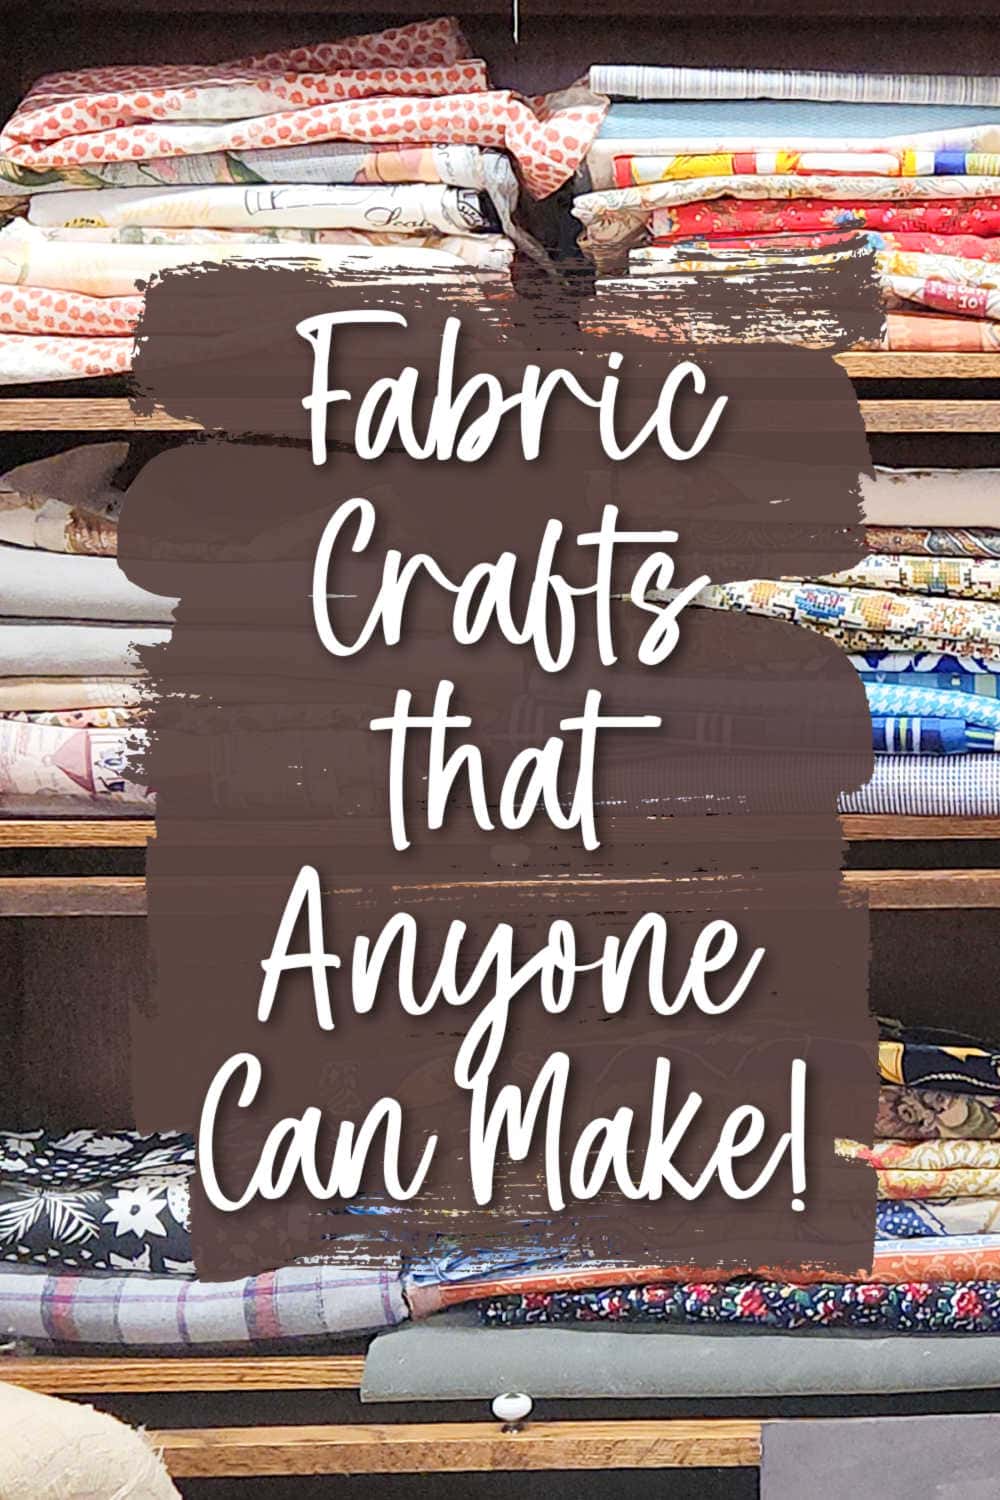 fabric crafts and scrapbuster ideas